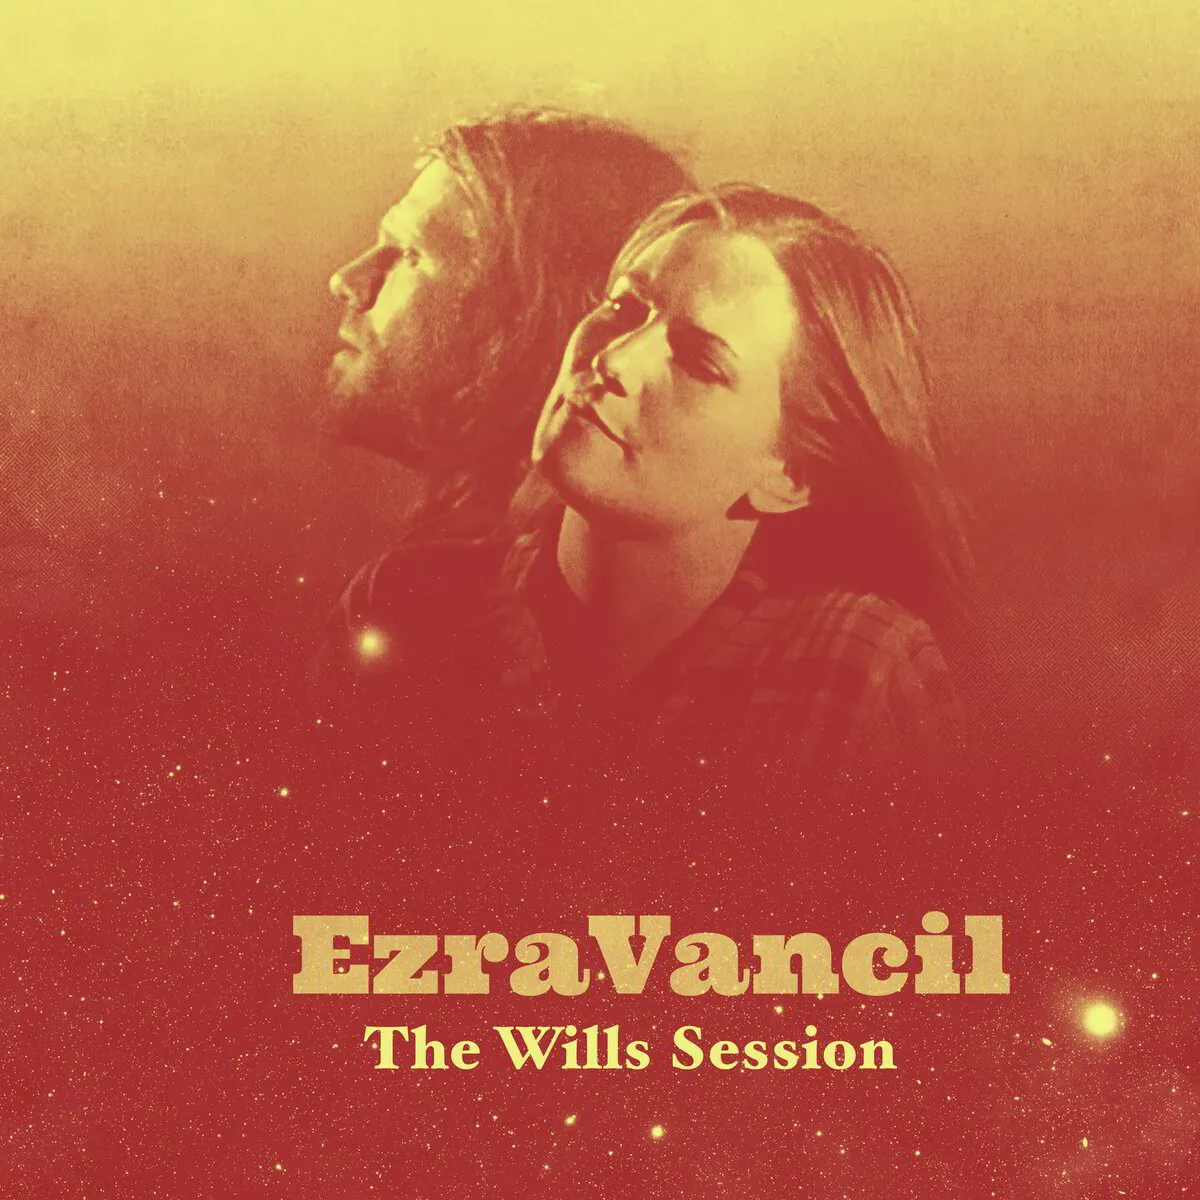 The Wills Session I [CD]